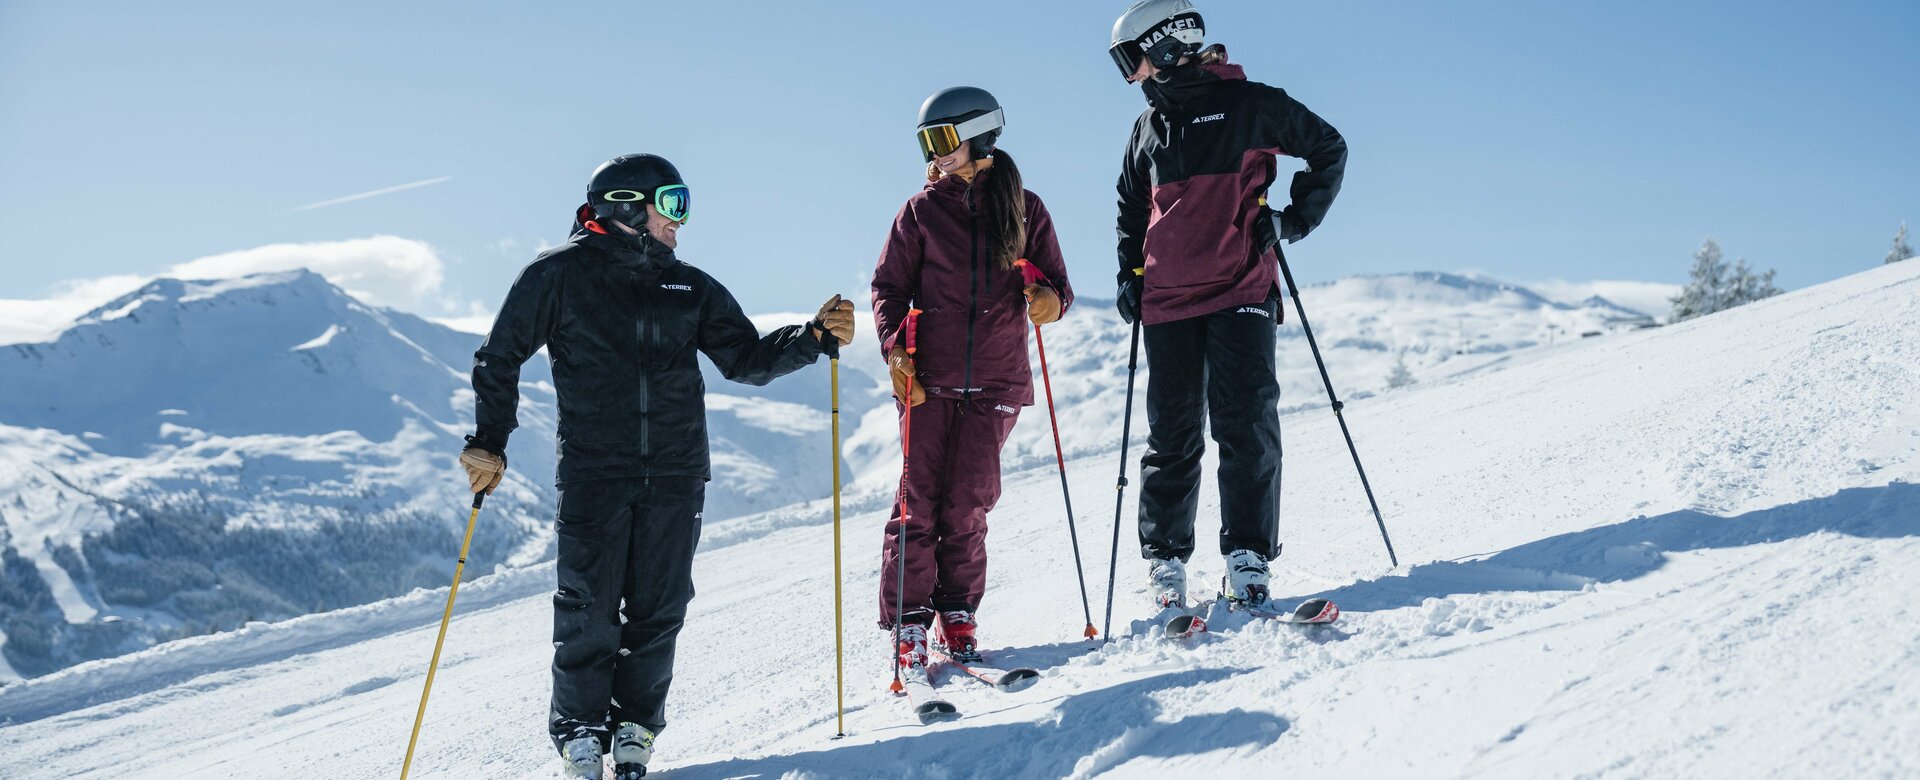 Three people in ski gear are standing on a slope talking with smiles and snow-capped mountains in the background | © Gasteinertal Tourismus GmbH, Christoph Oberschneider